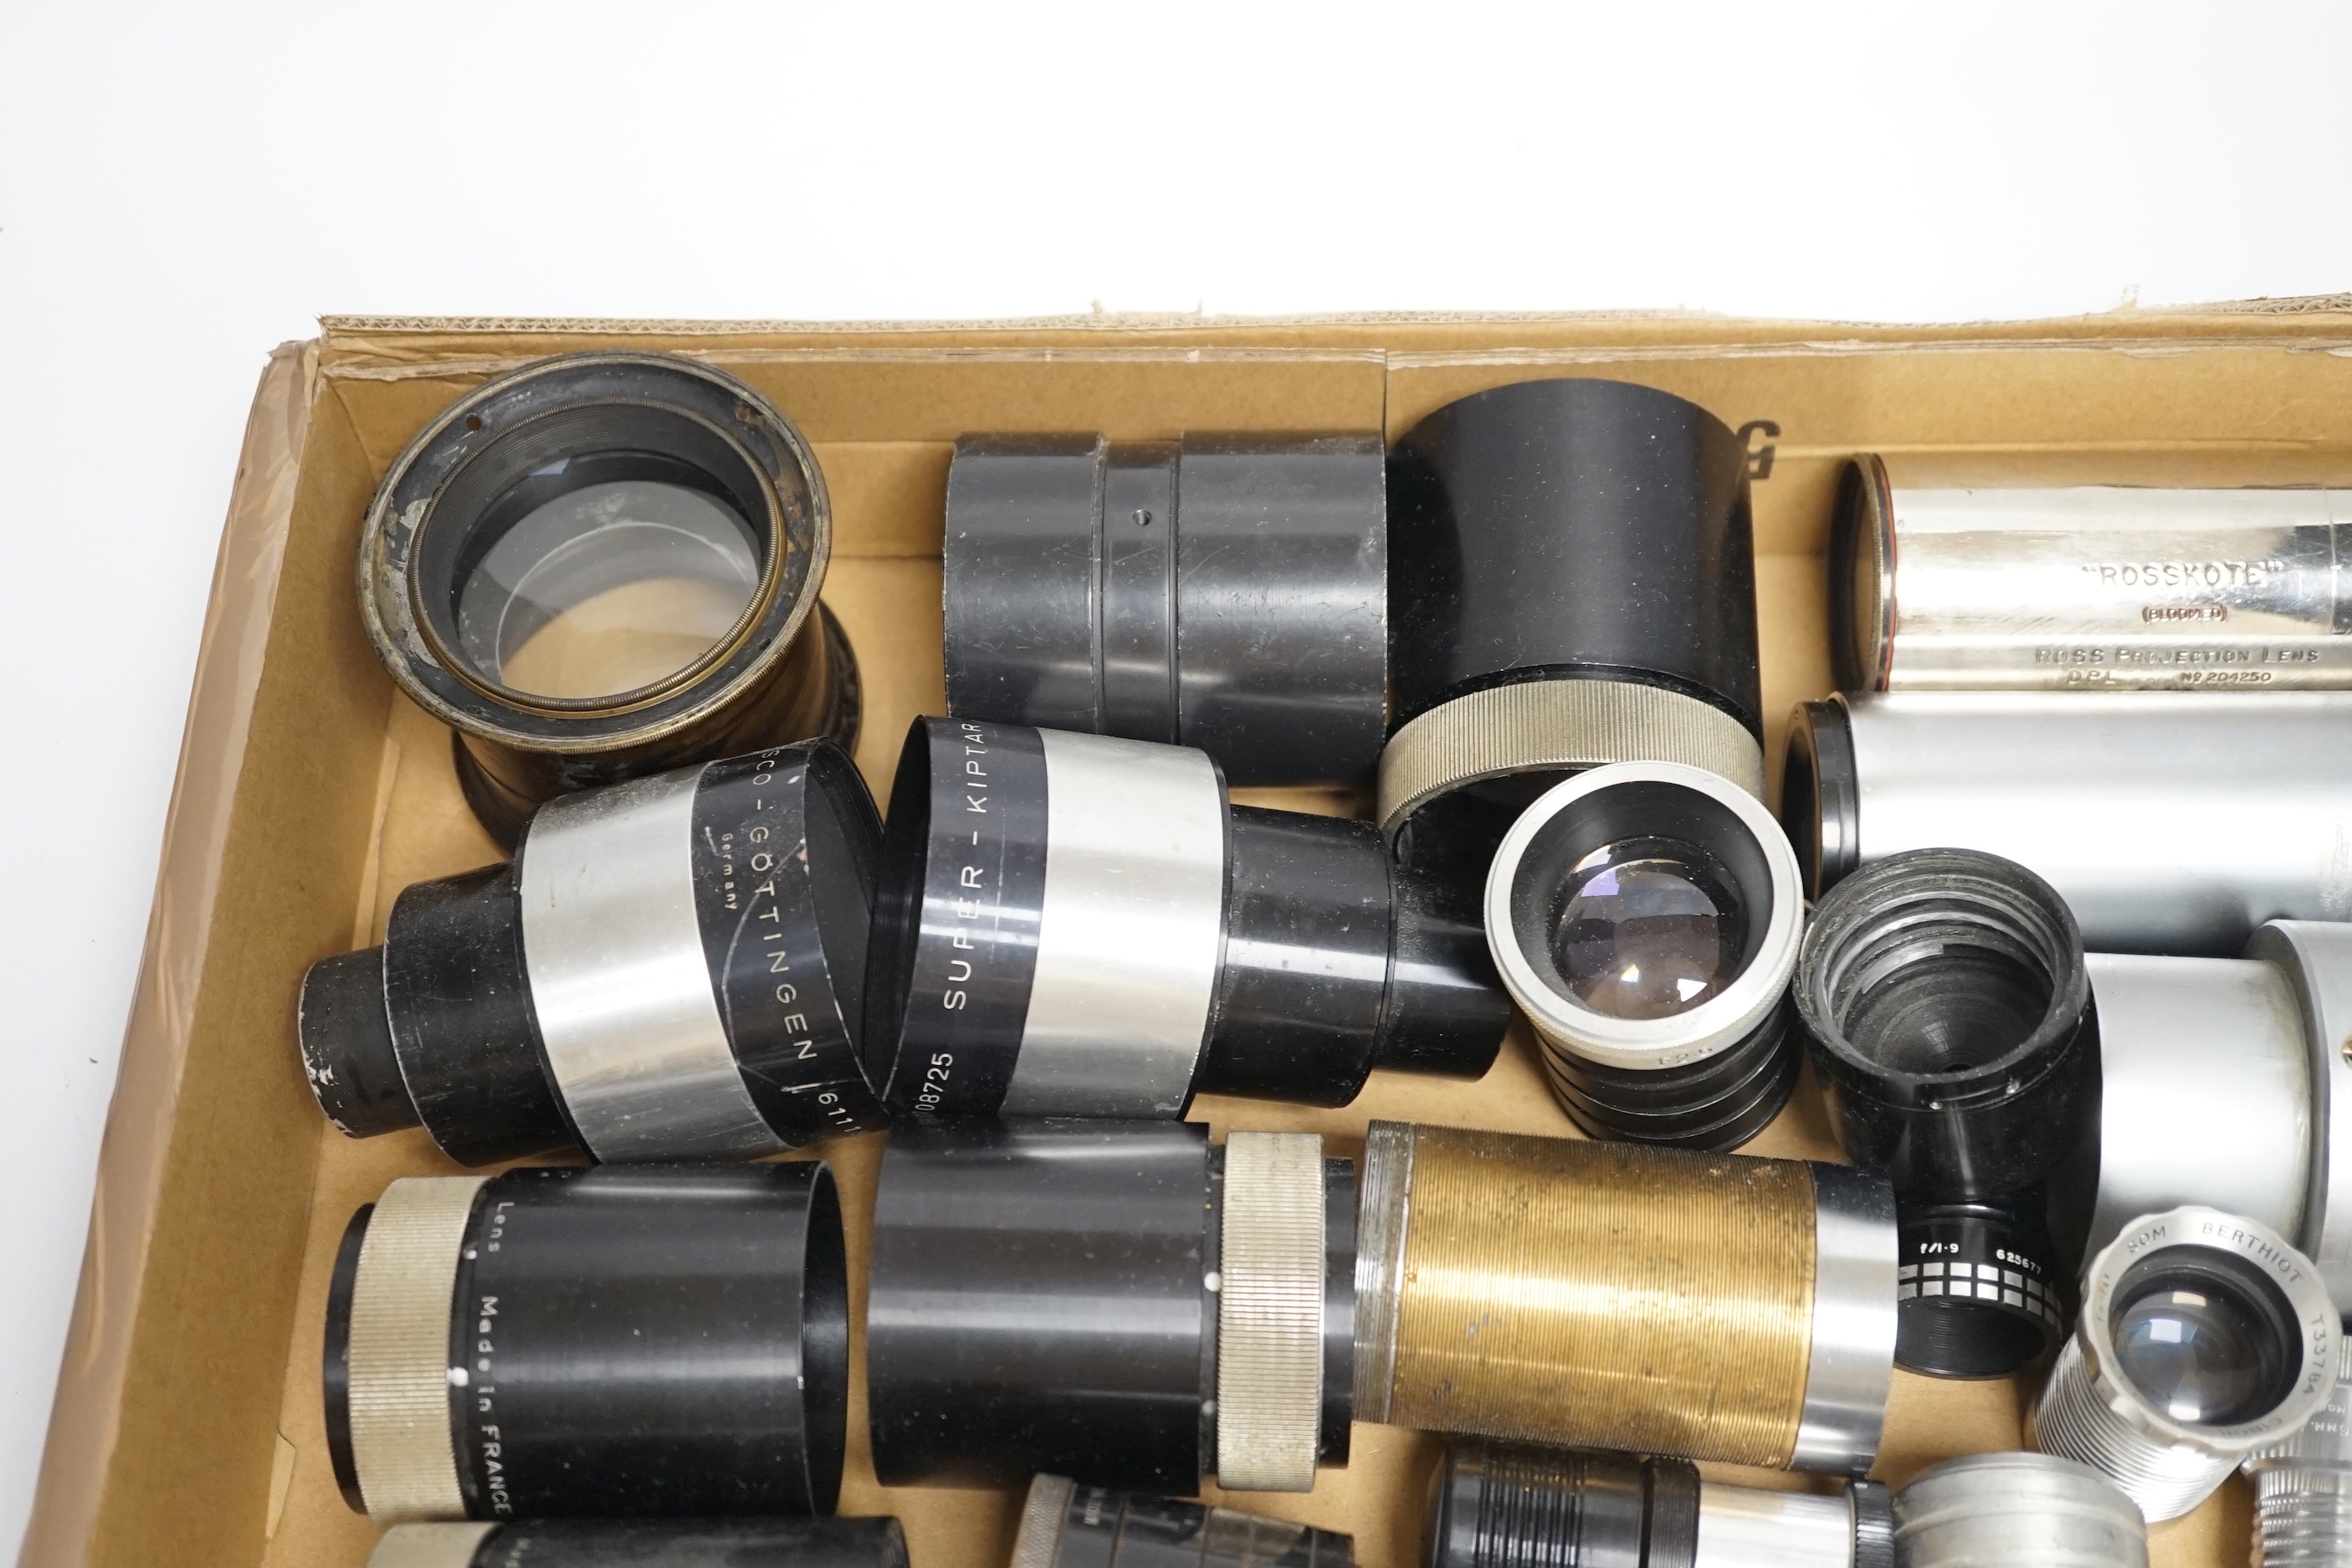 A collection of vintage cine camera lenses including examples by Taylor-Hobson, Super Six, Berthiot, Isco-Gotingen, Eumig, Ross, Gaumont Kalee, Aldis, etc.